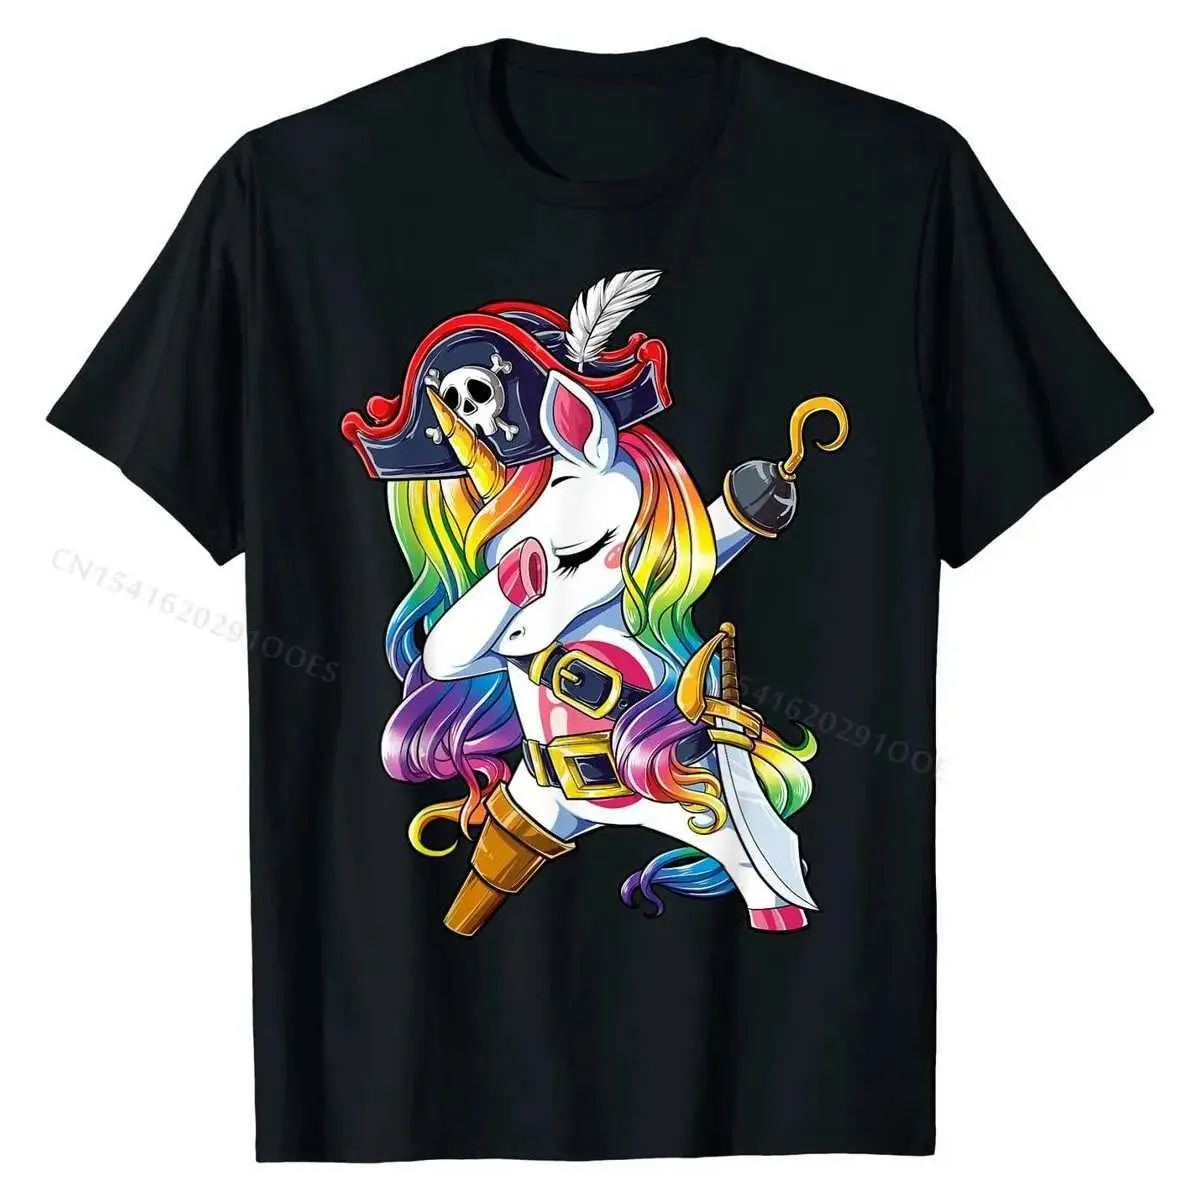 T-shirts masculins tamponnant le pirate de licorne Roger Come Kids Girls Boys T-shirt Tops